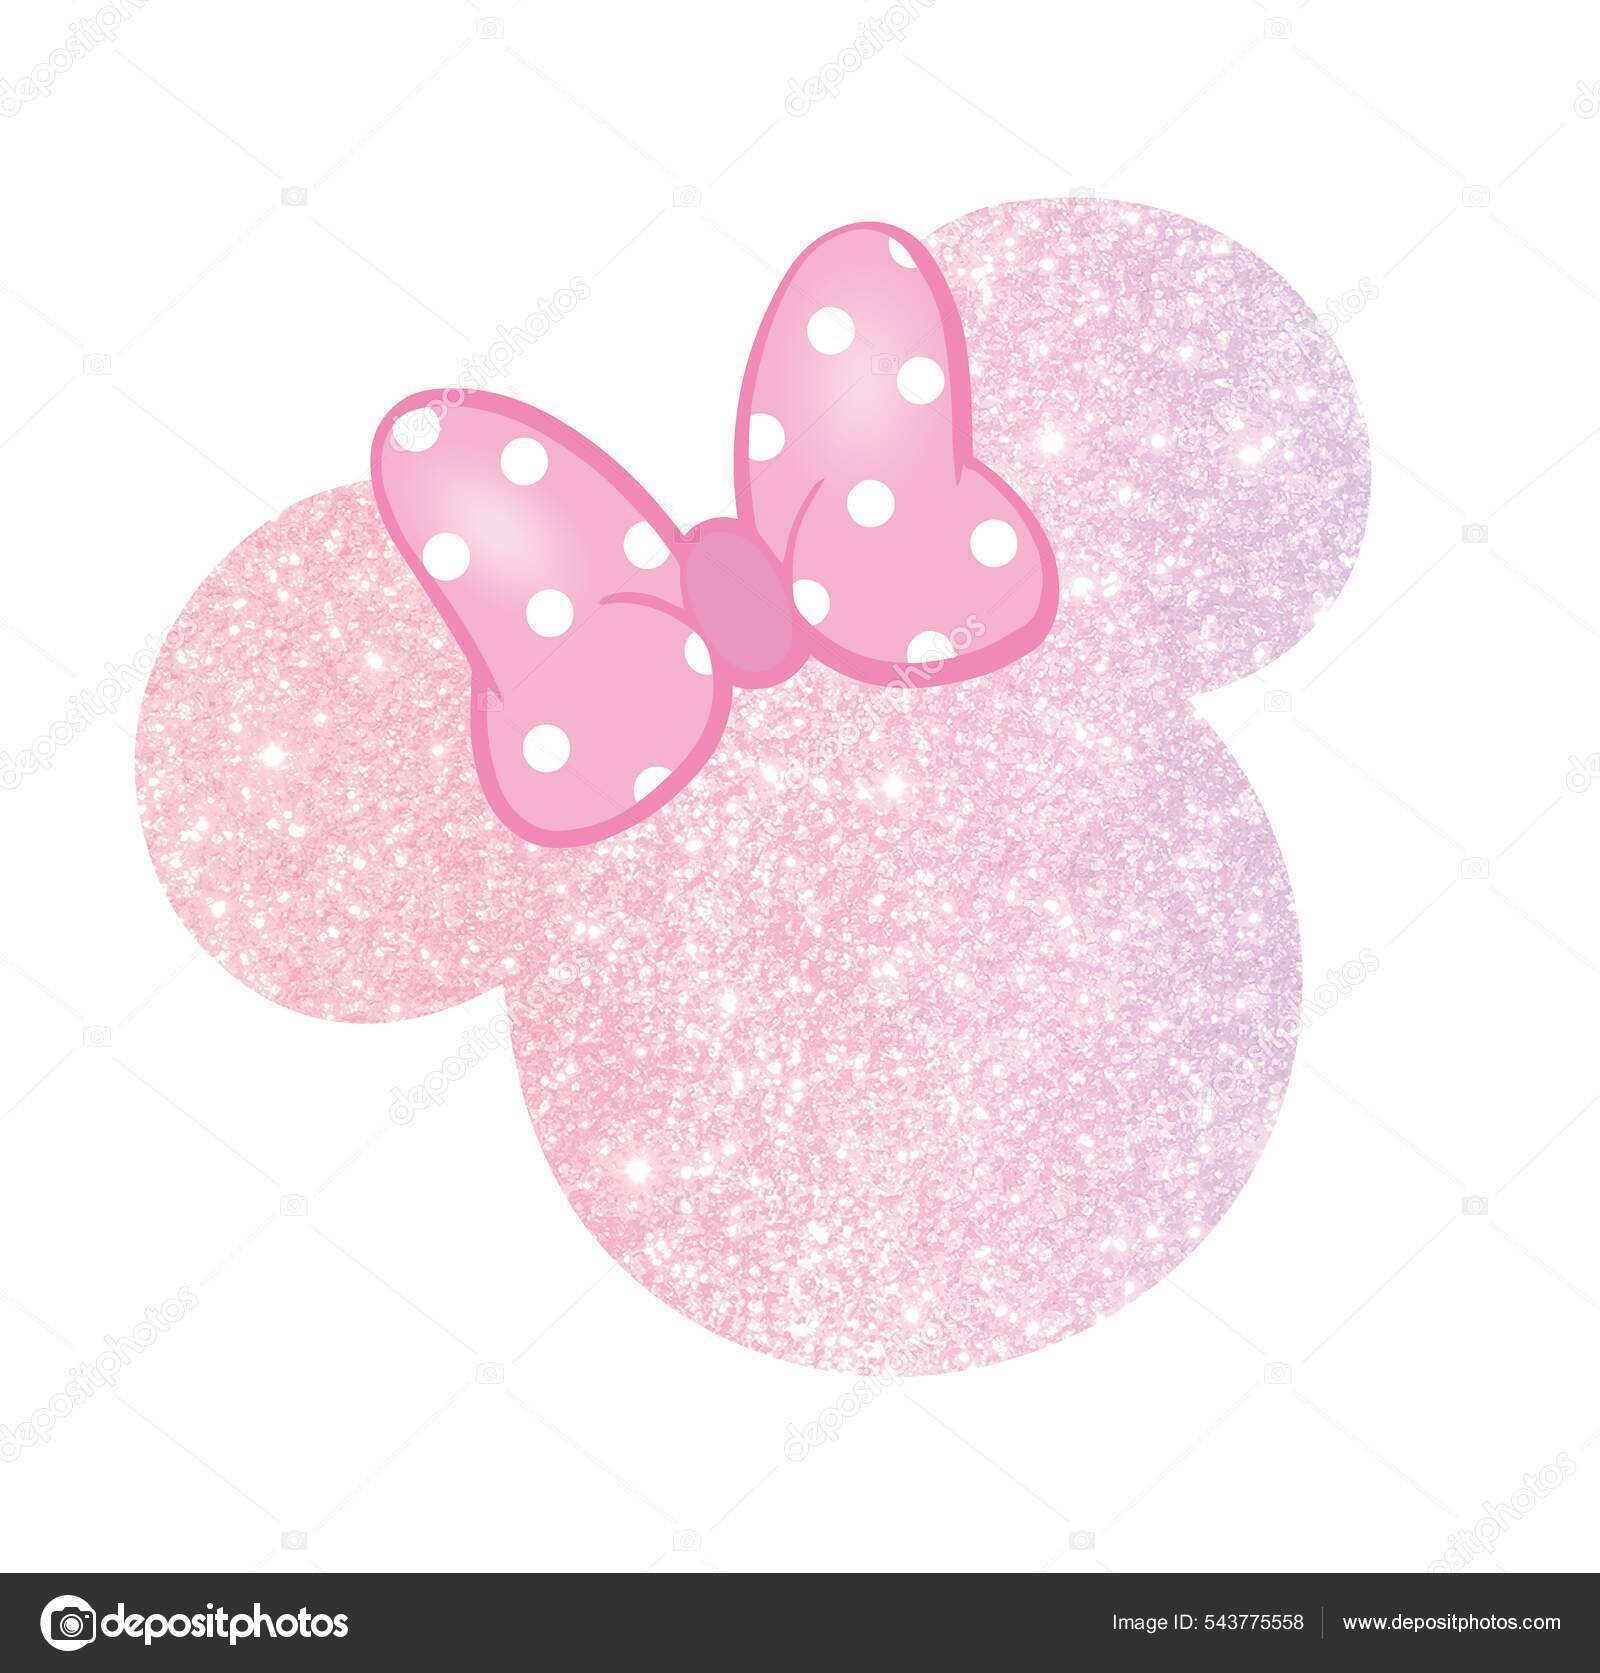 Minnie mouse Stock Photos, Royalty Free Minnie mouse Images